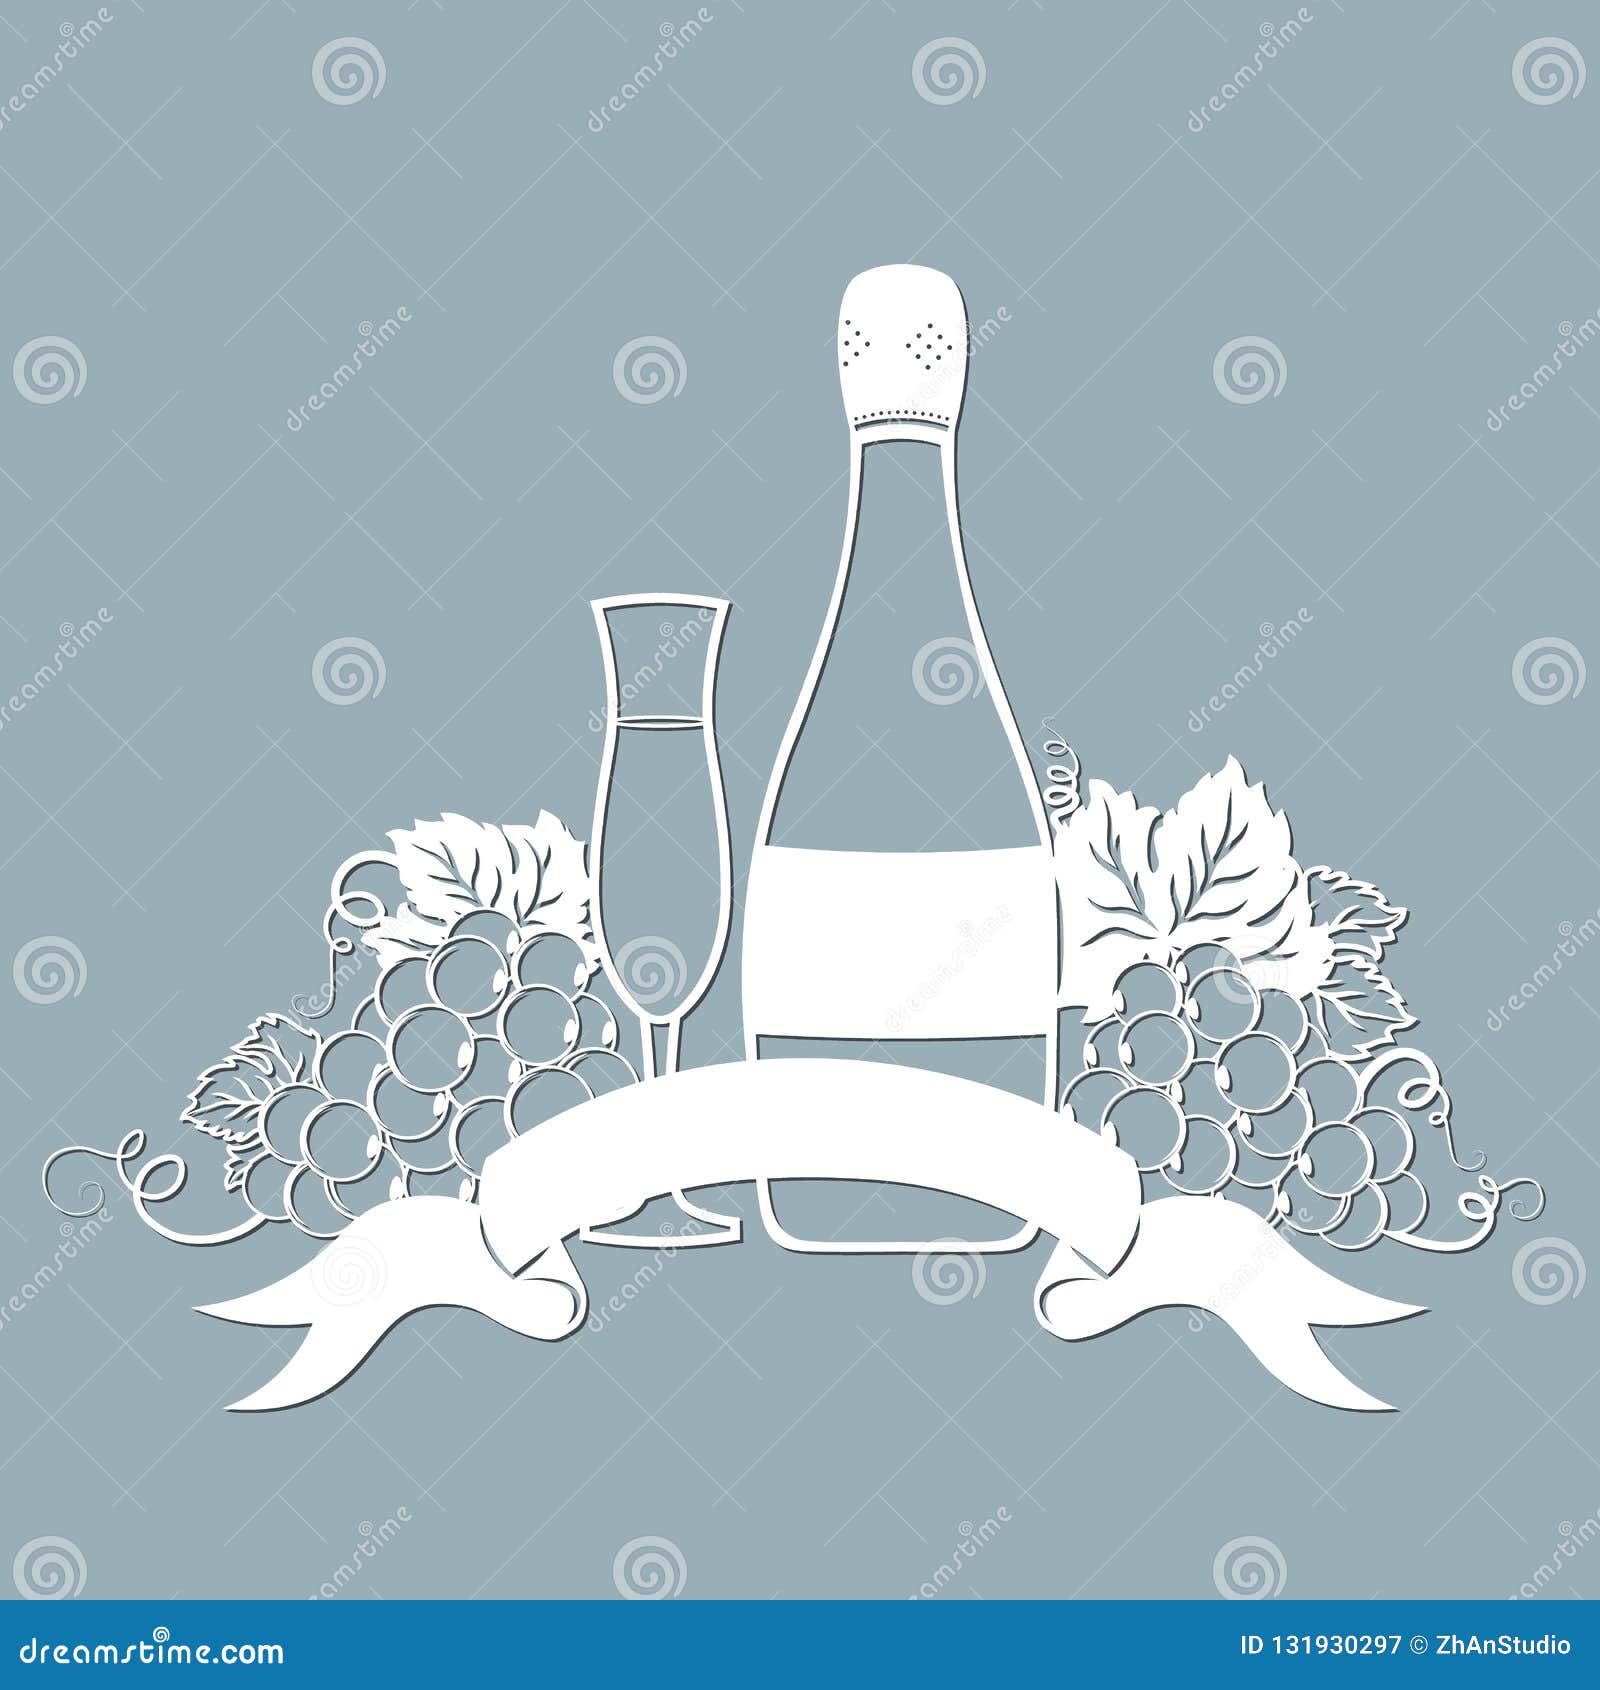 template for laser cutting, plotter, and silkscreen printing. vine. grape. a bottle of champagne and a glass